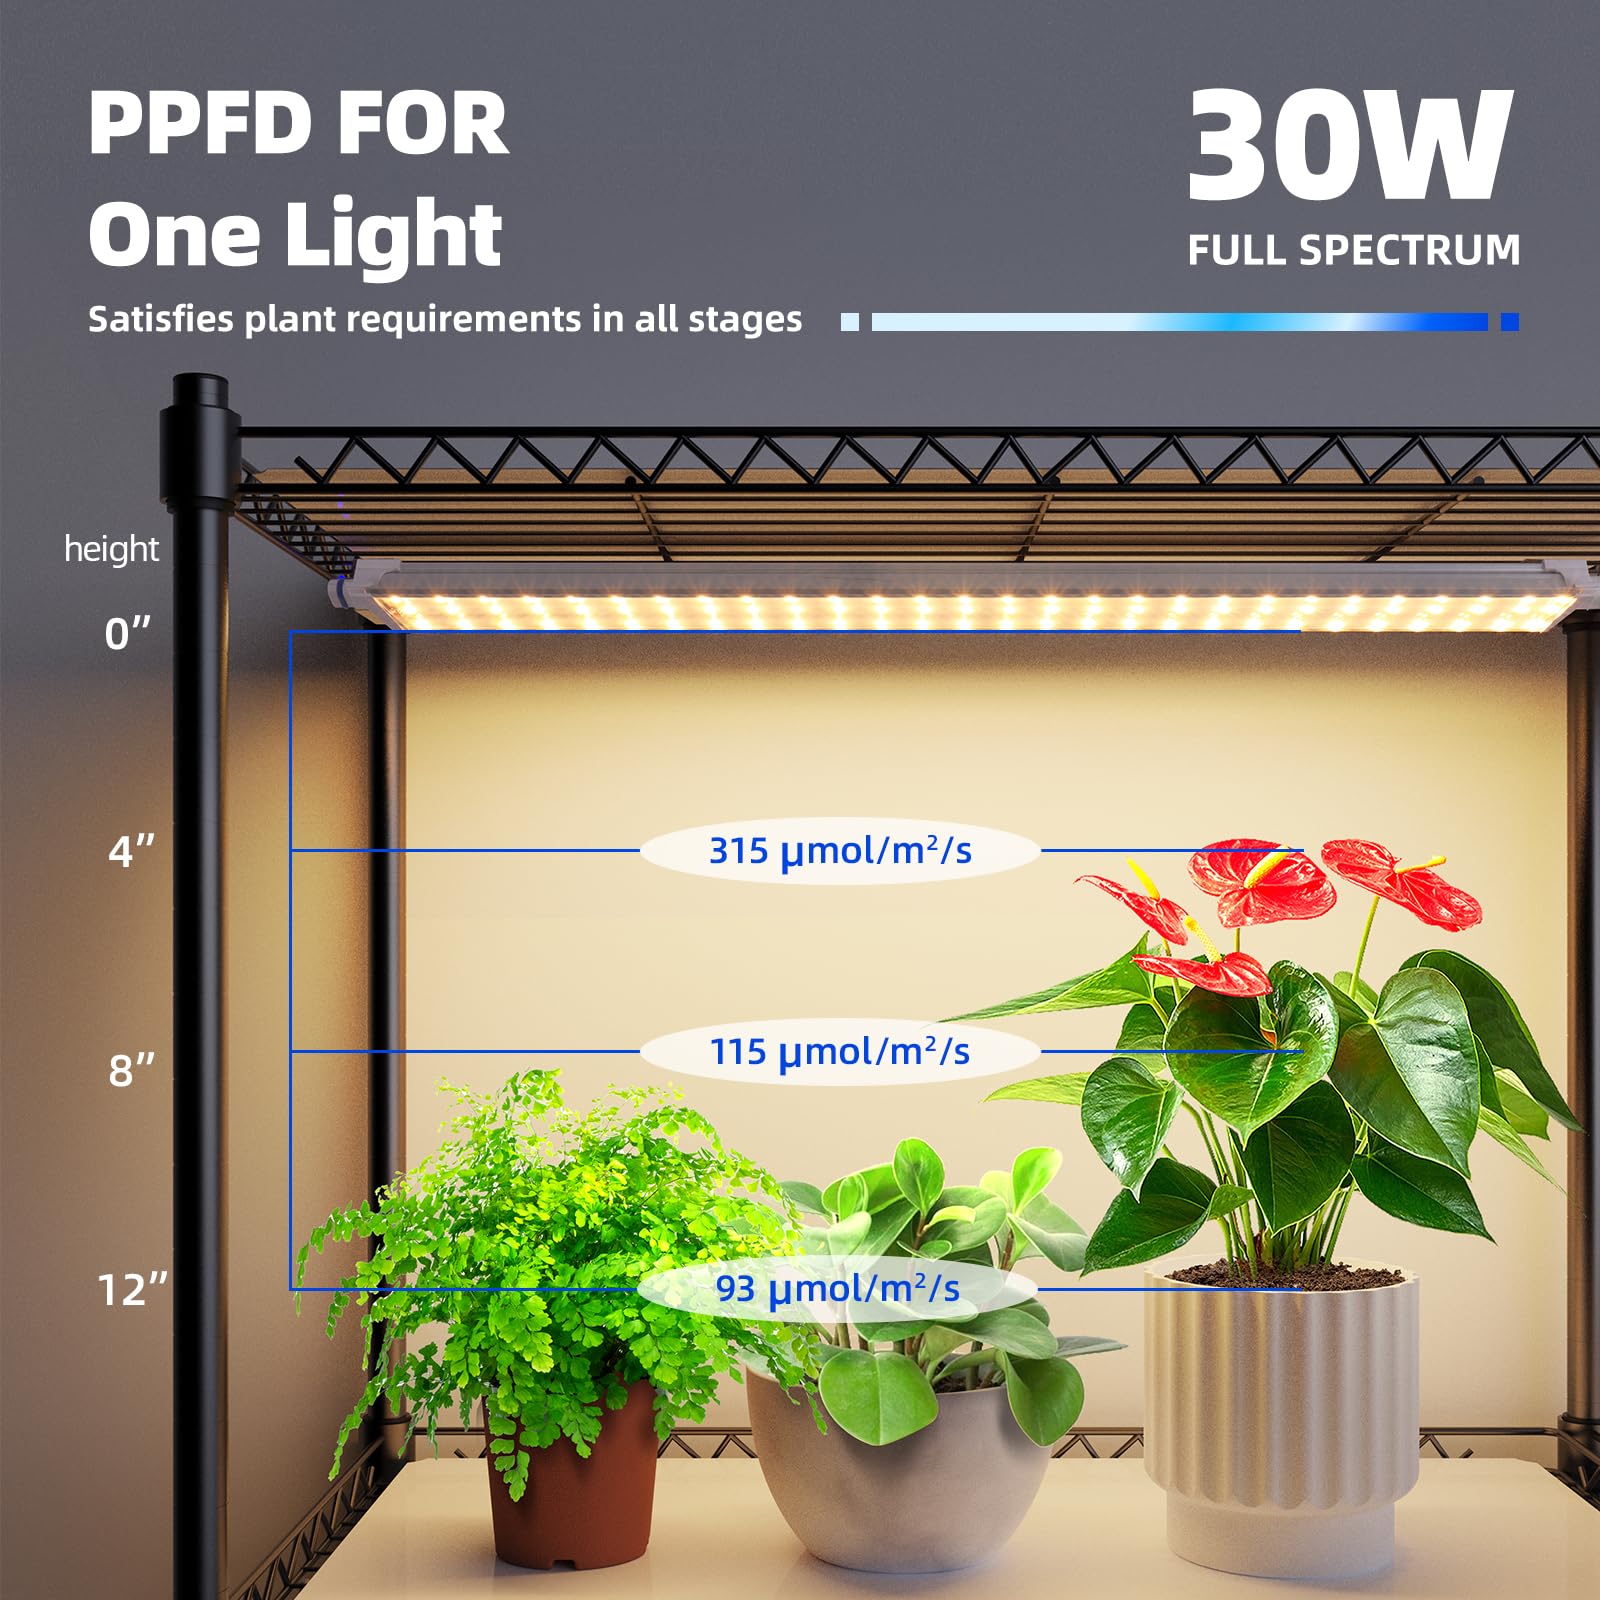 6-Tier Plant Stand with 2020T LED Grow Lights,29.5x13.8x71IN,30W,Full Spectrum,5 lights,CJ30GCR